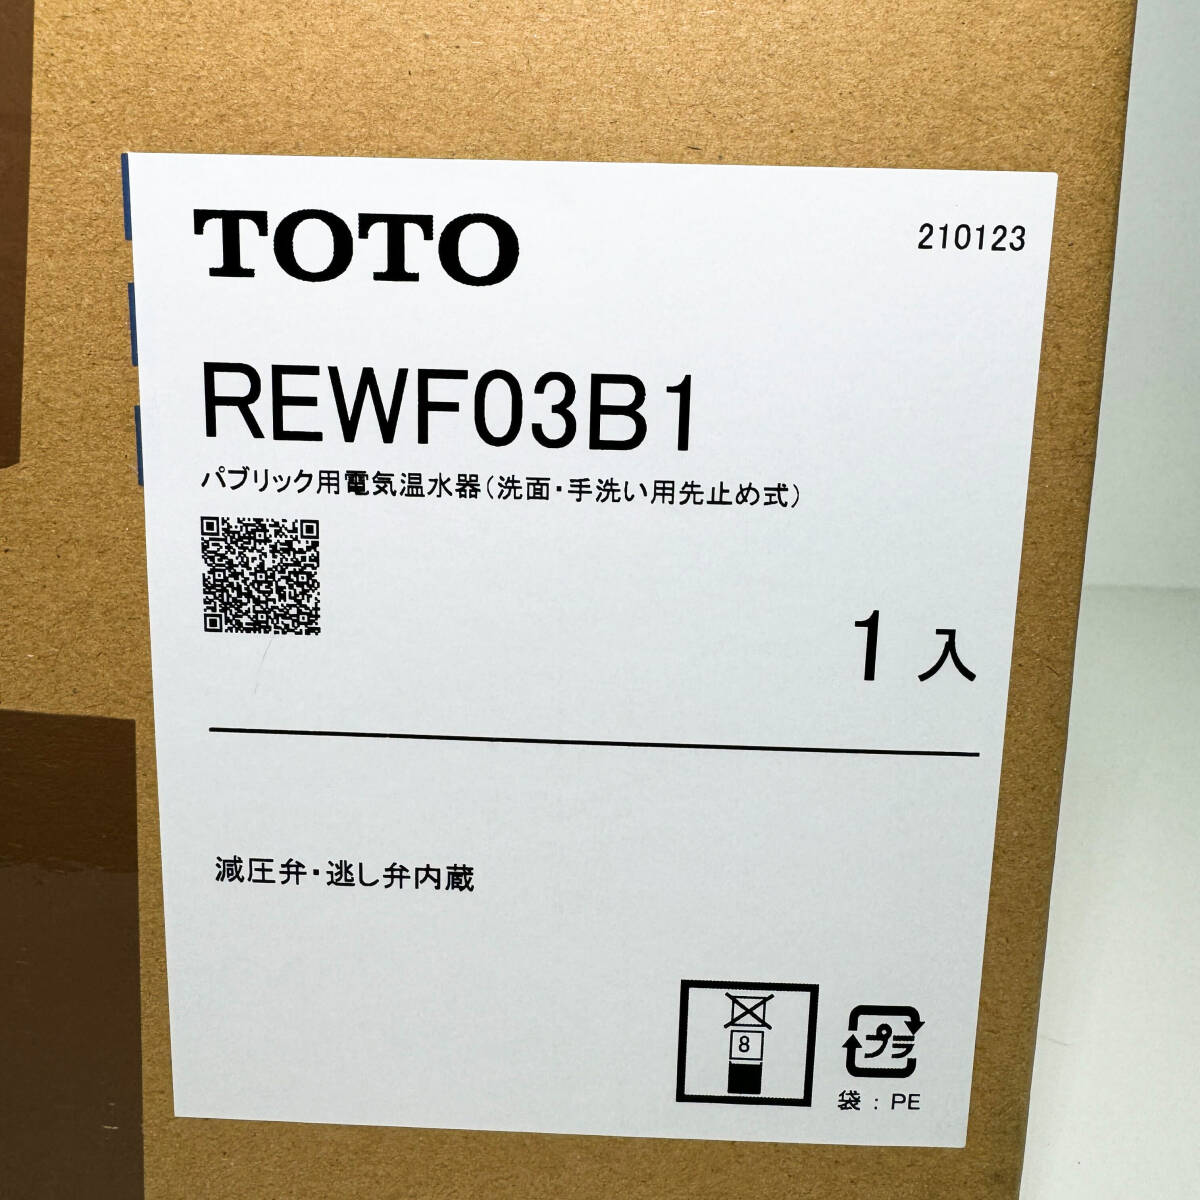 * unopened * TOTO small size electric hot water vessel REWF03B1pa yellowtail k for electric hot water vessel hot water ... face washing lavatory . cease type DIY home building equipment [4304]